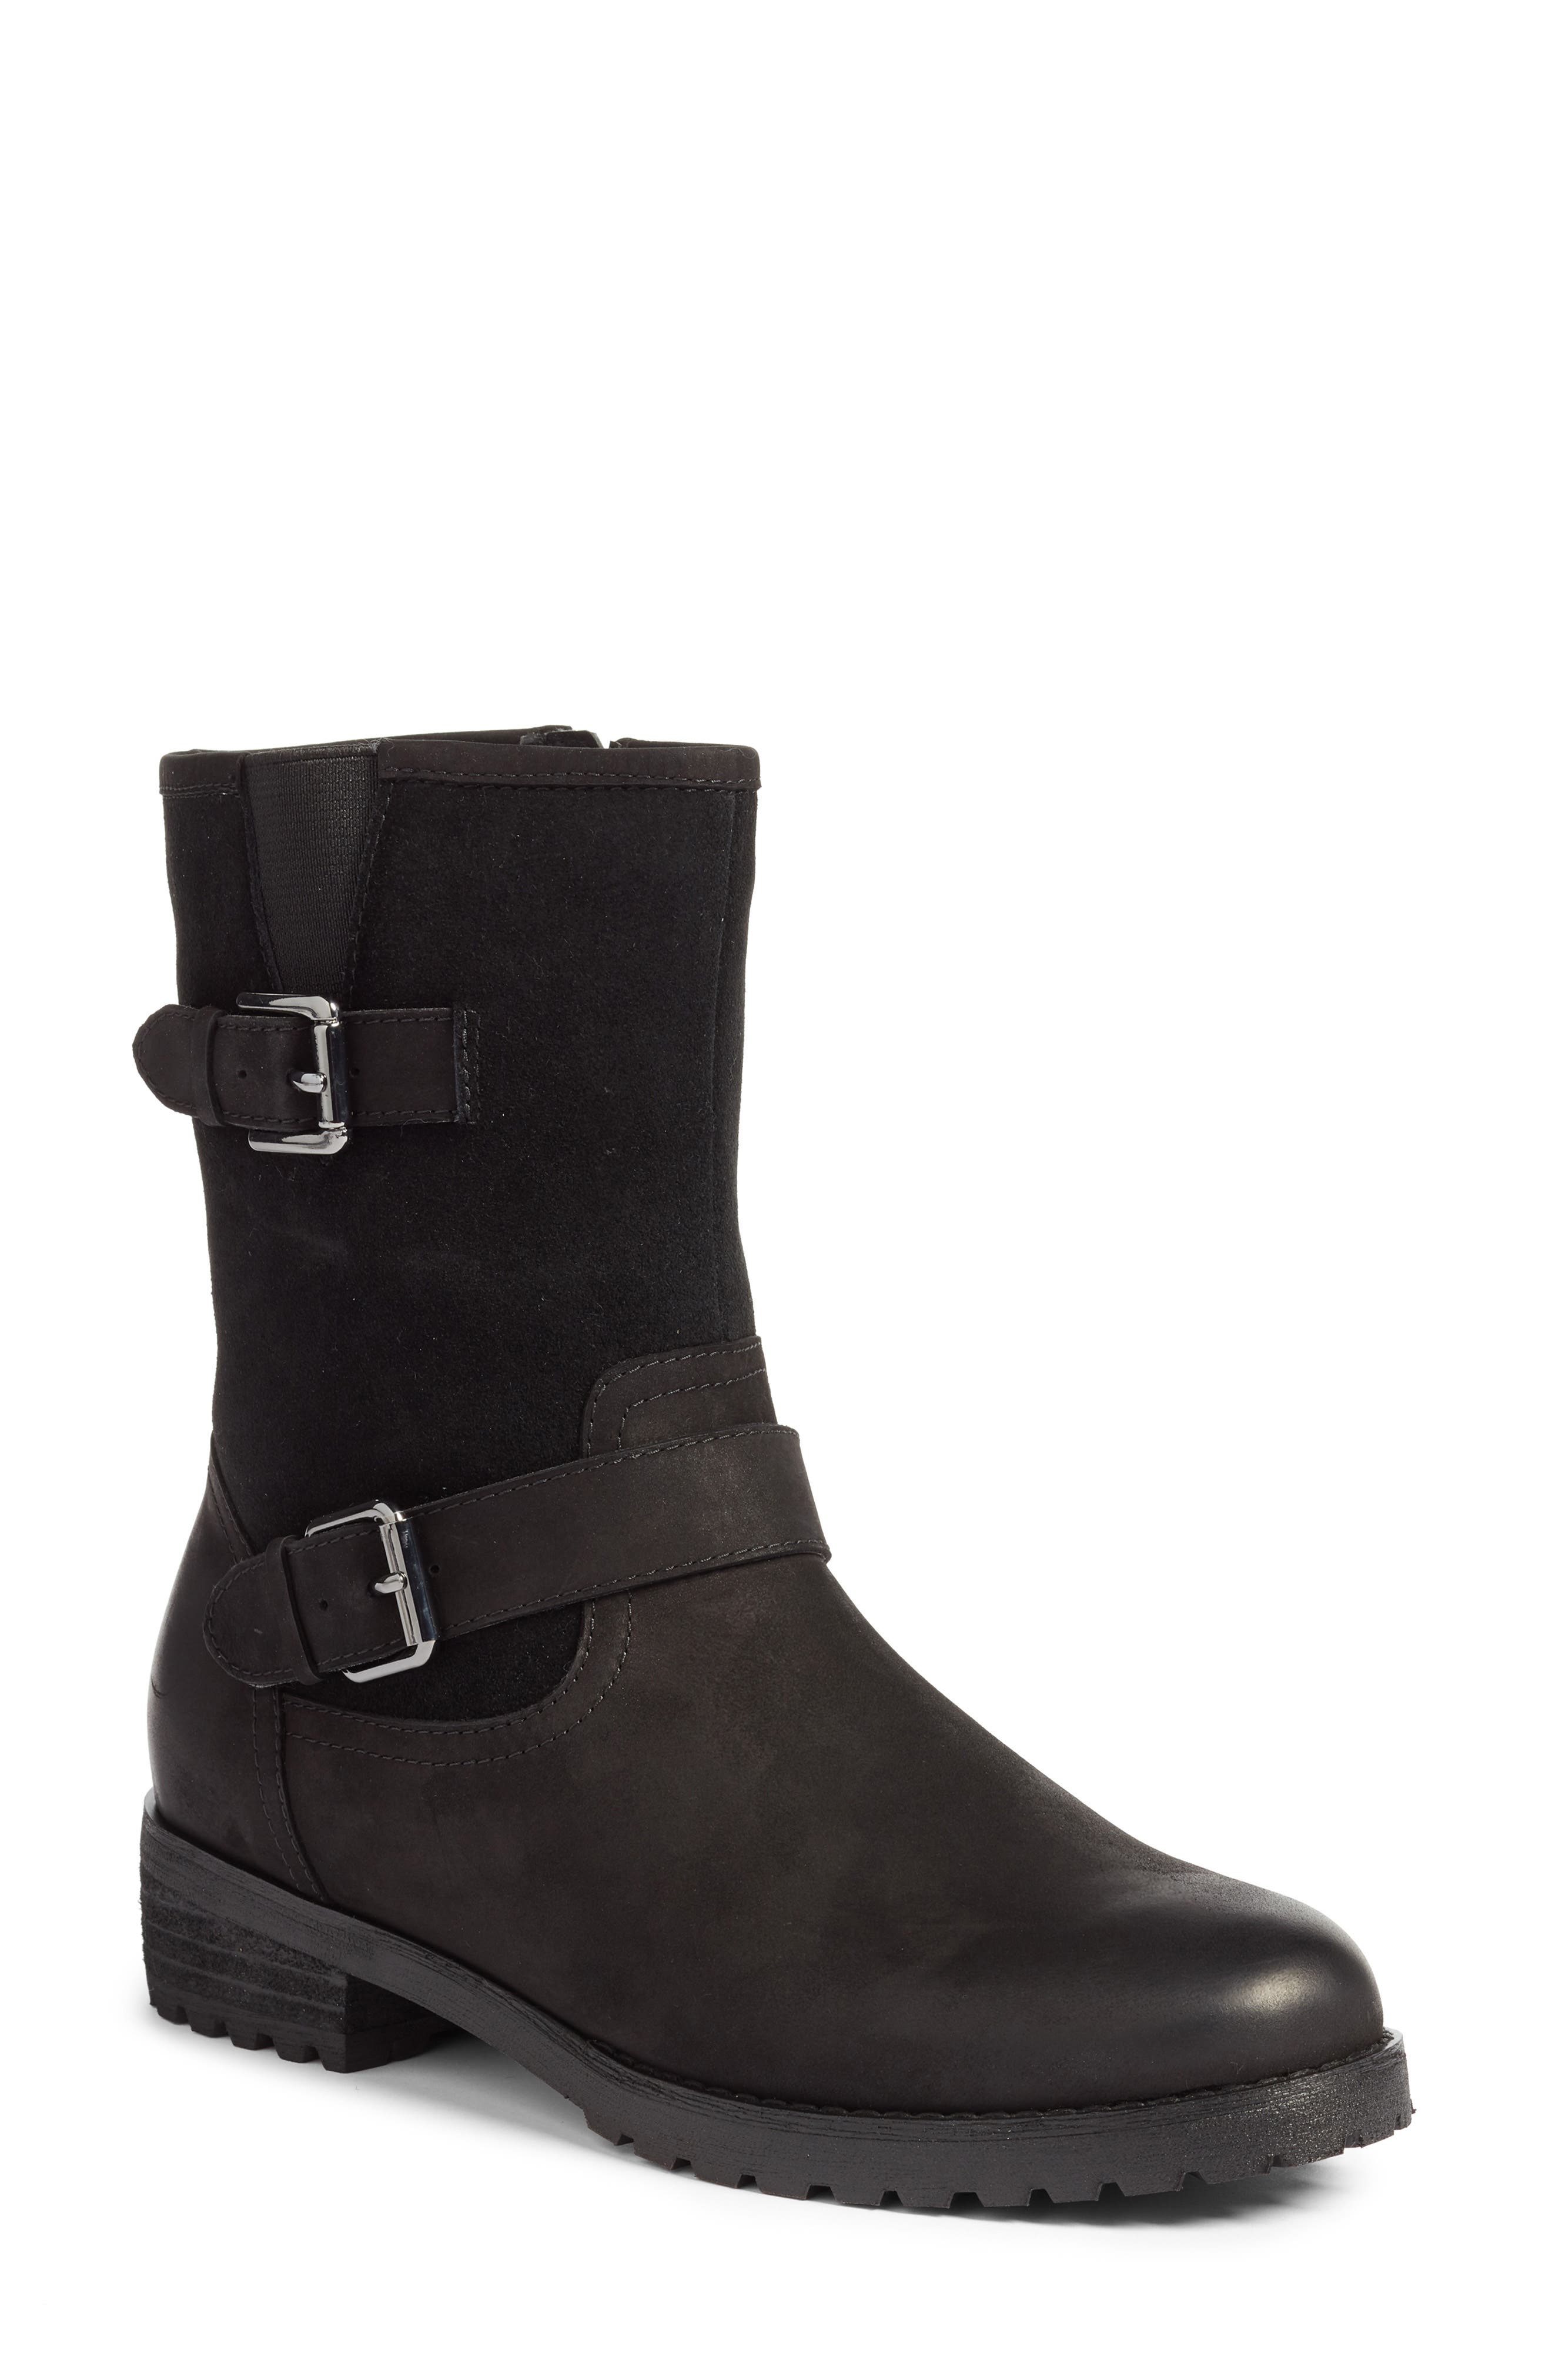 fly london boots on sale